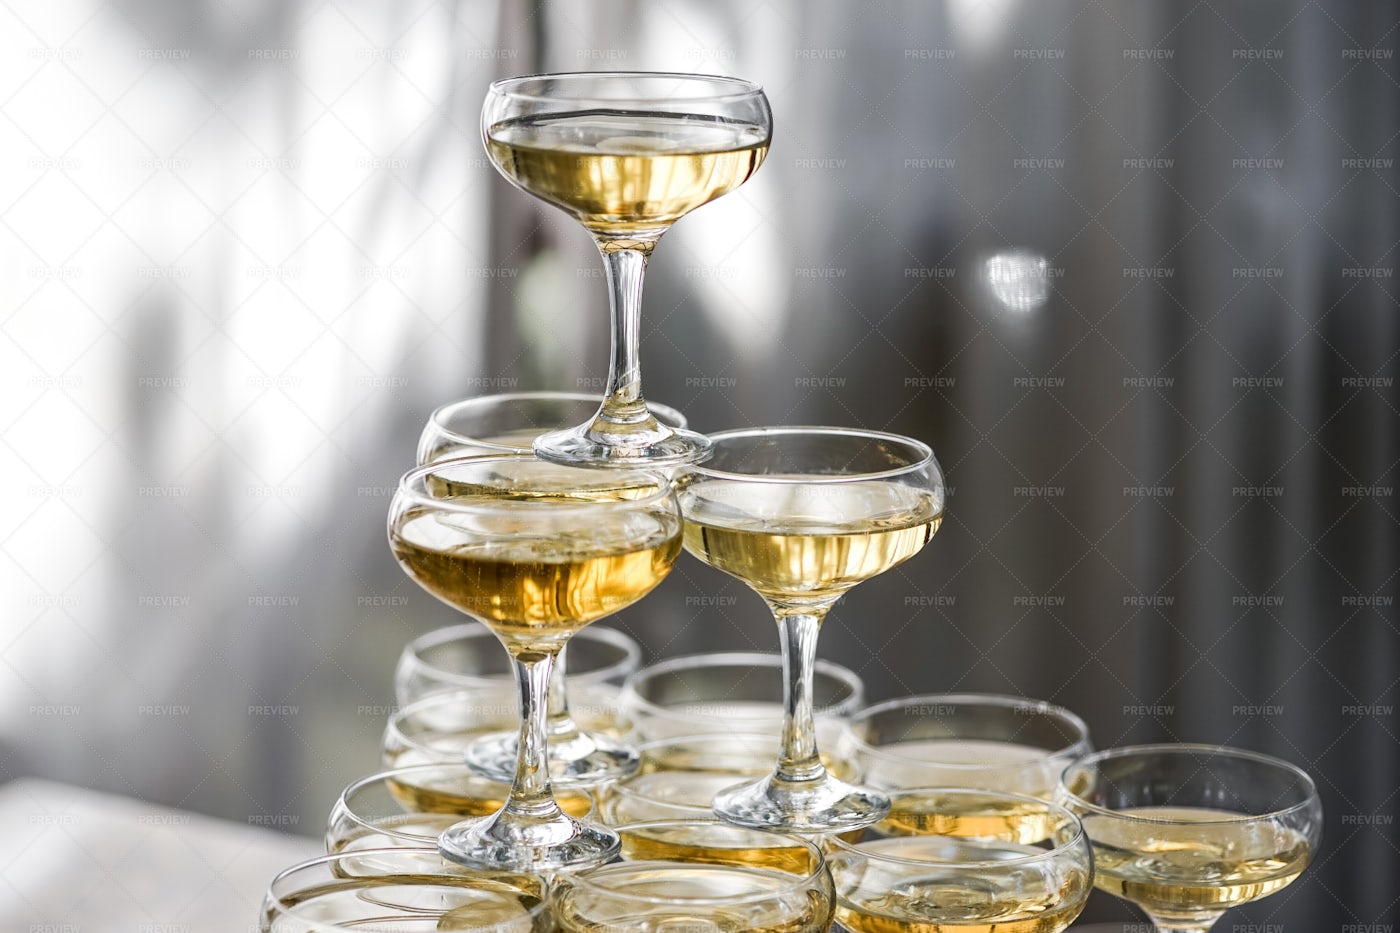 Pyramid Of Champagne Glasses: Stock Photos